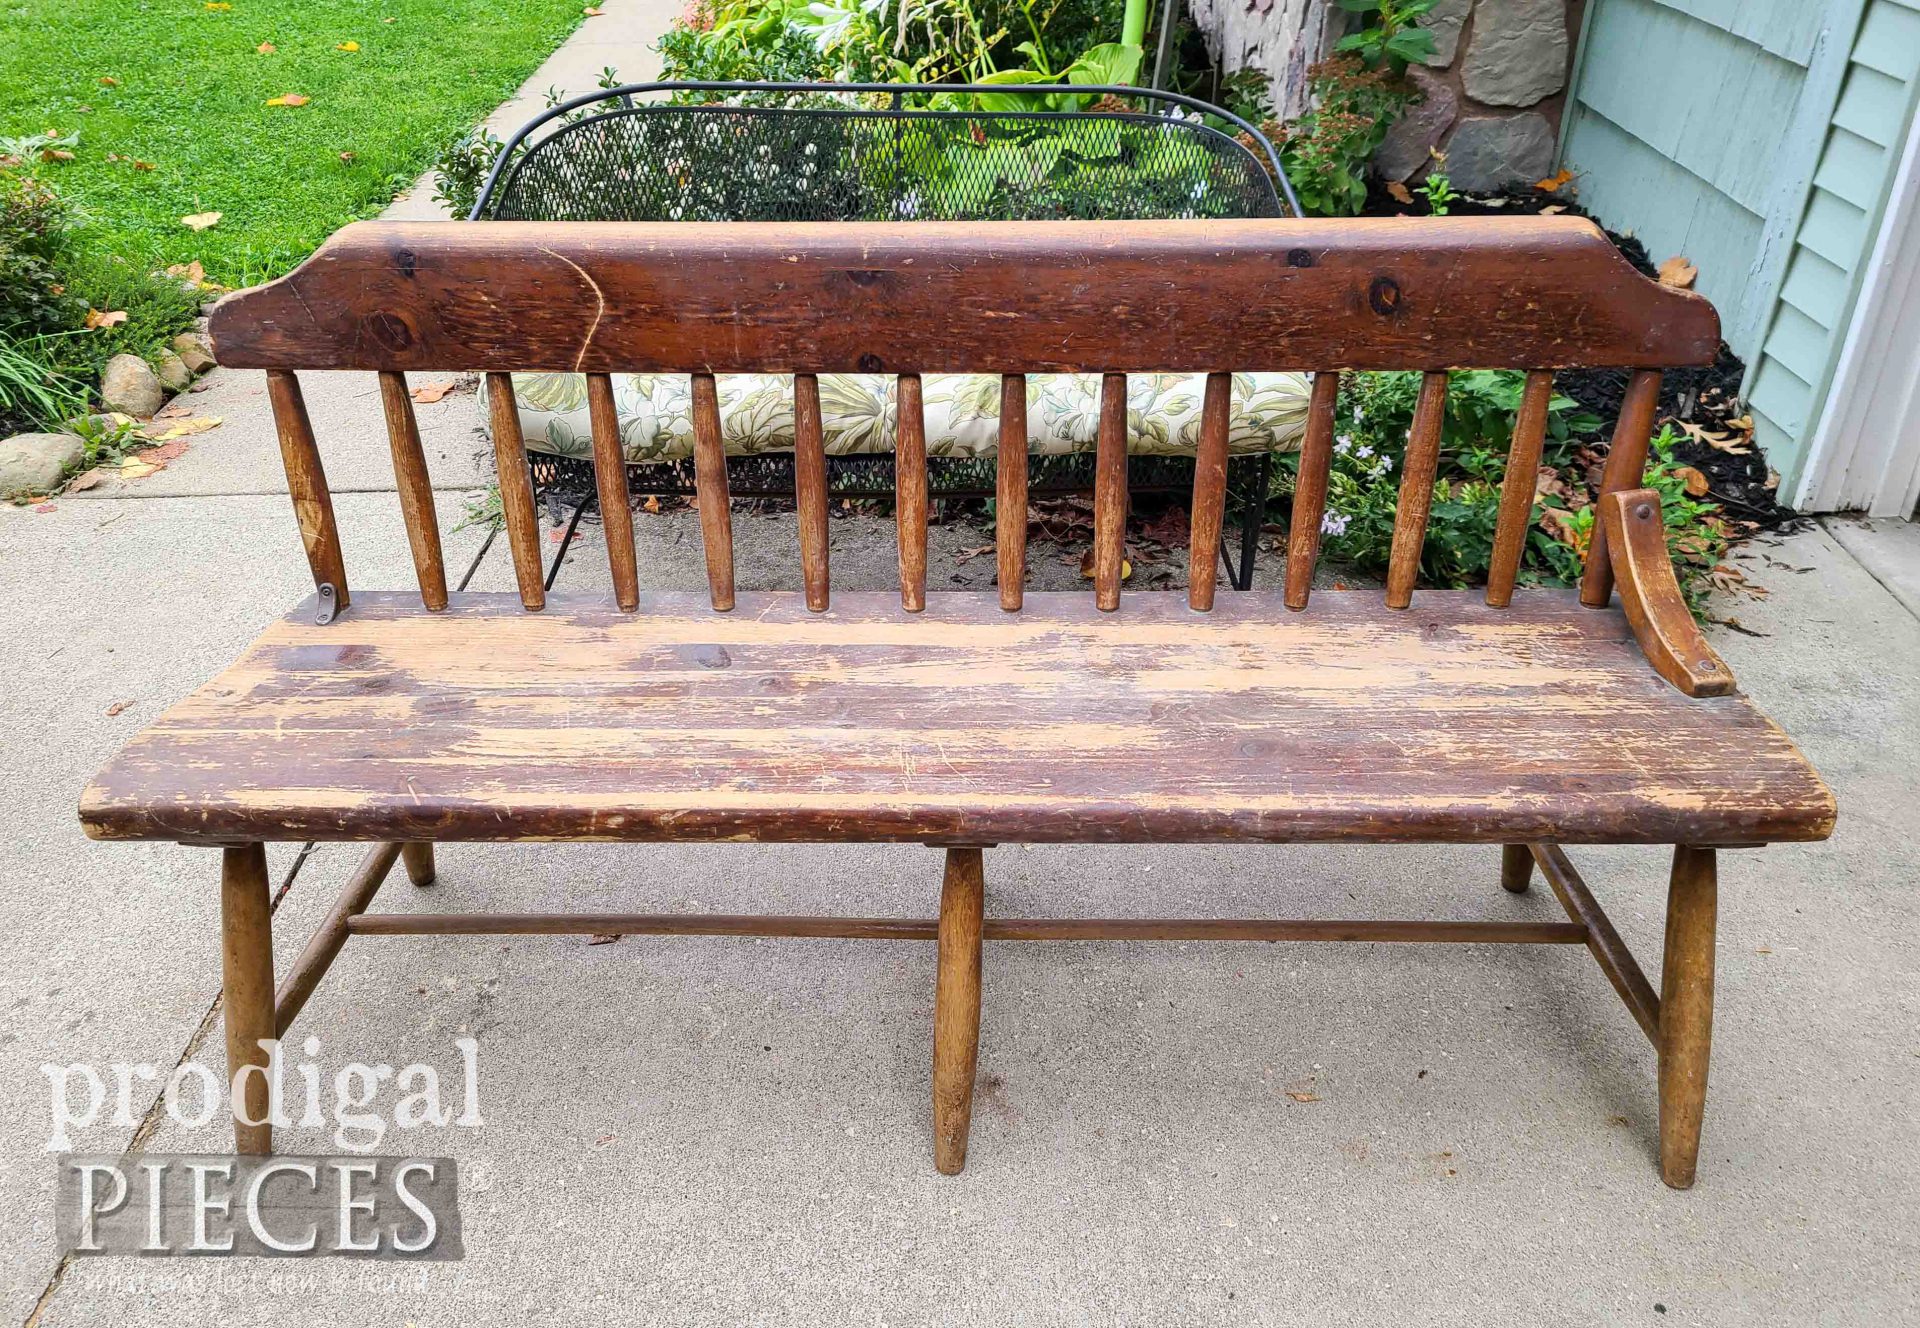 Farmhouse Bench Before Makeover by Larissa of Prodigal Pieces | prodigalpieces.com #prodigalpieces